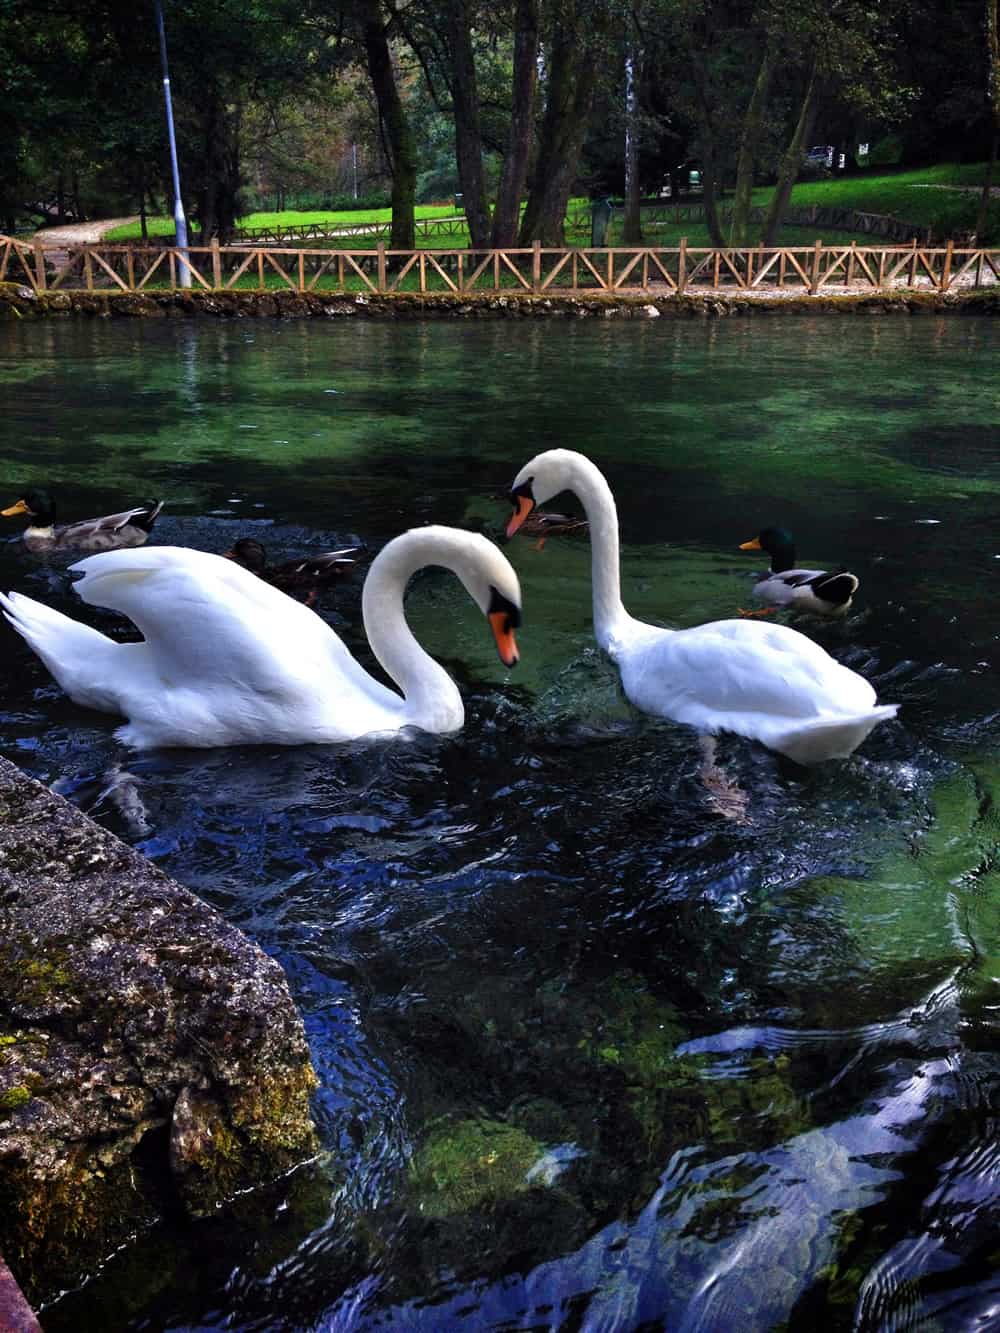 A photo of two white swans swimming peacefully in a pond.